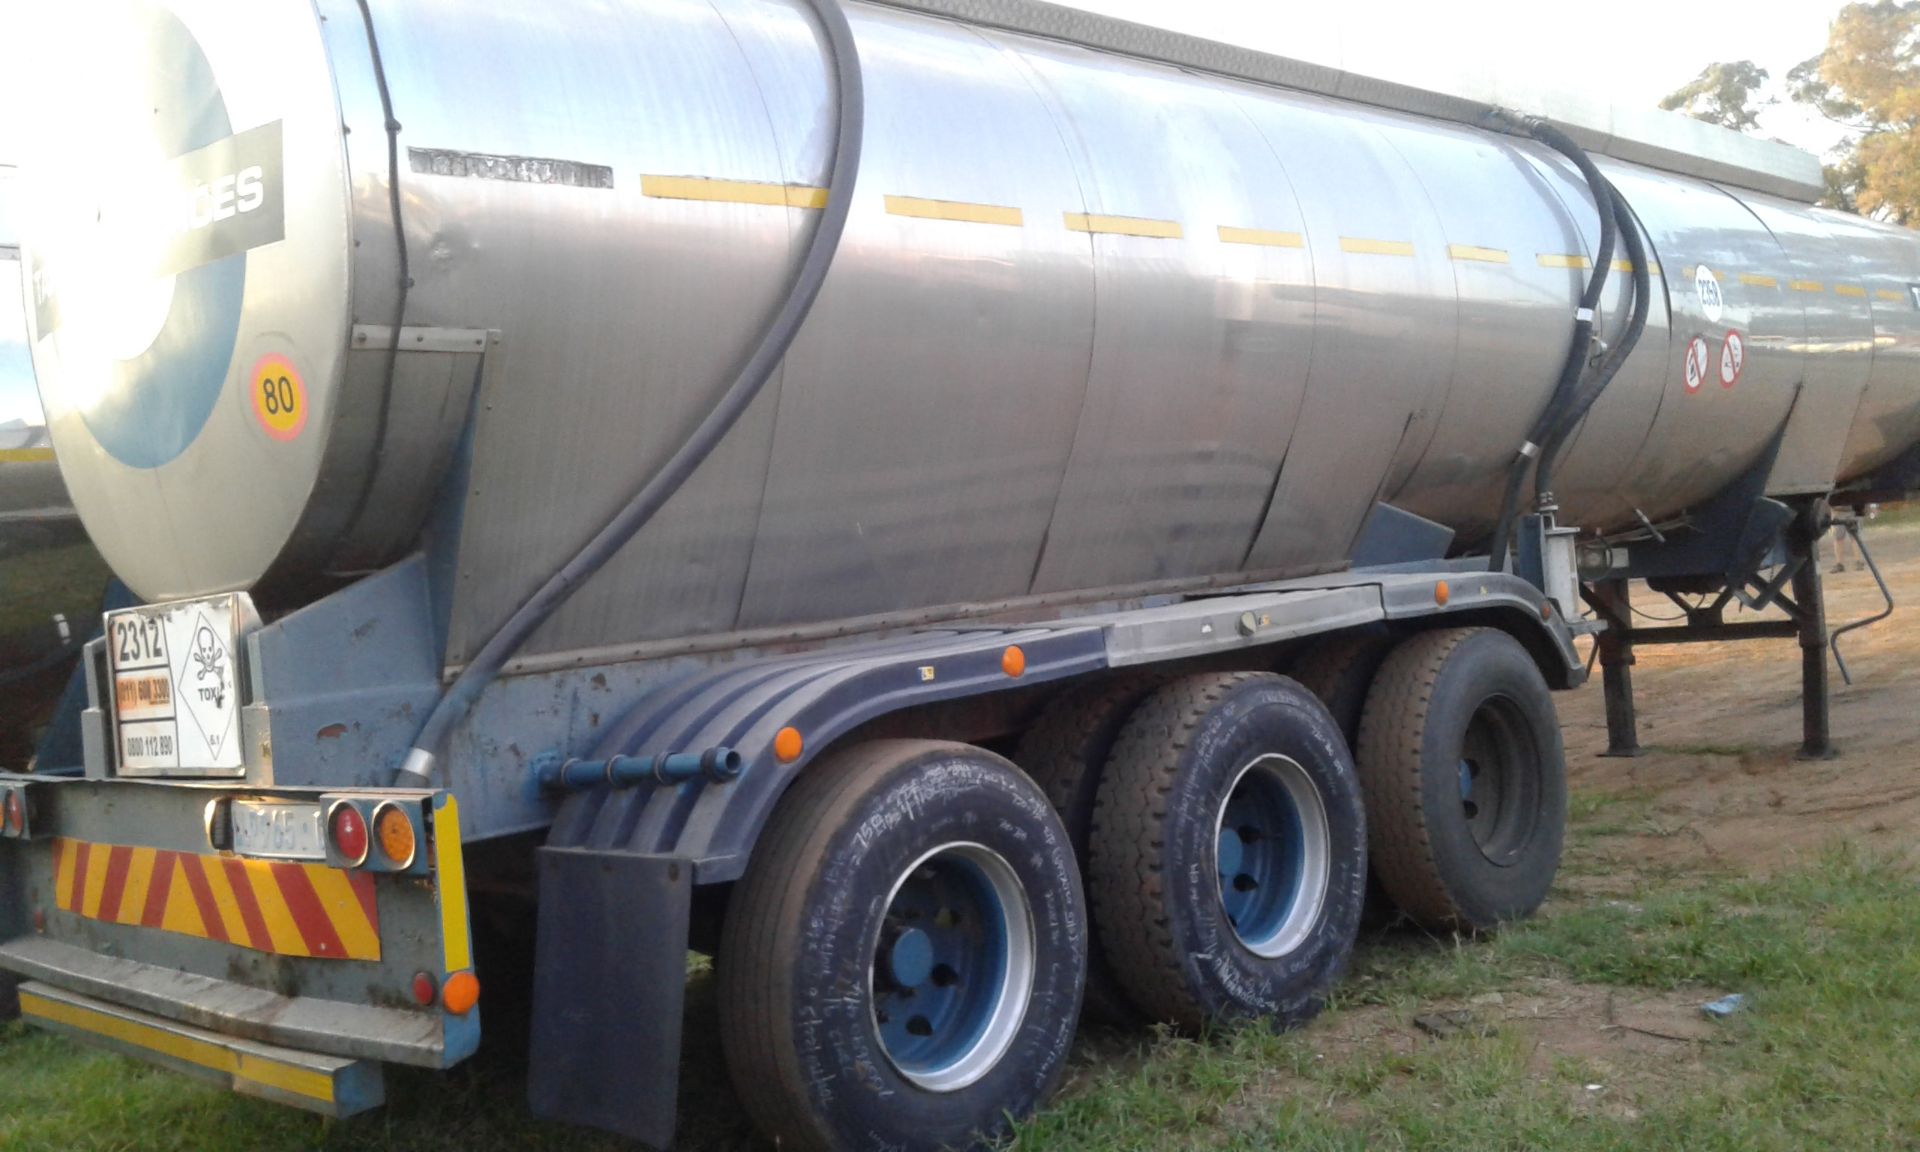 1987 HENRED TRI-AXLE STAINLESS STEEL TANKER TRAILER - (LLP965GP) - Image 2 of 4